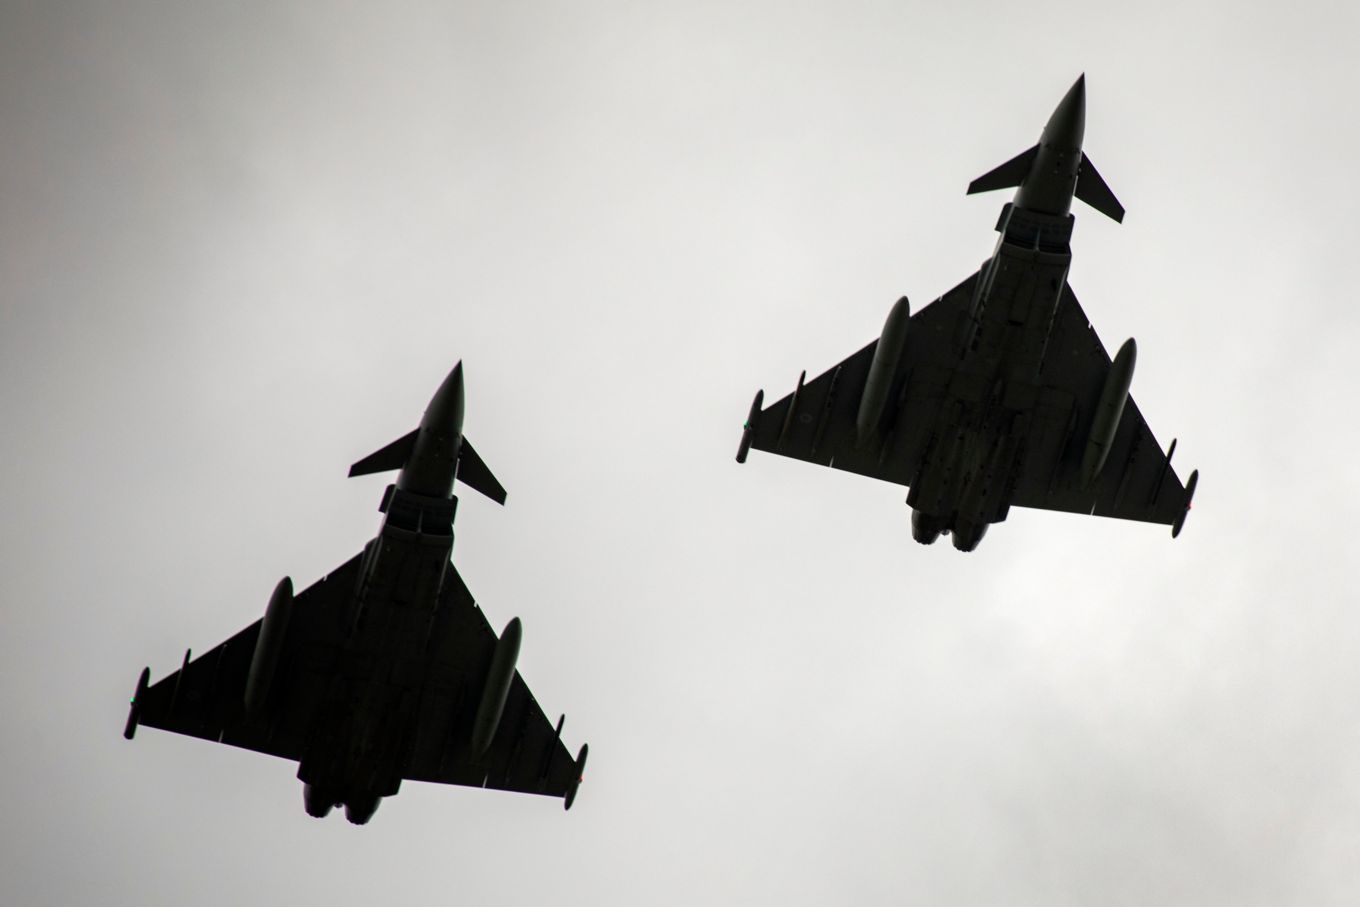 Two Typhoons on a sortie during the NATO Enhanced Air Policing Mission